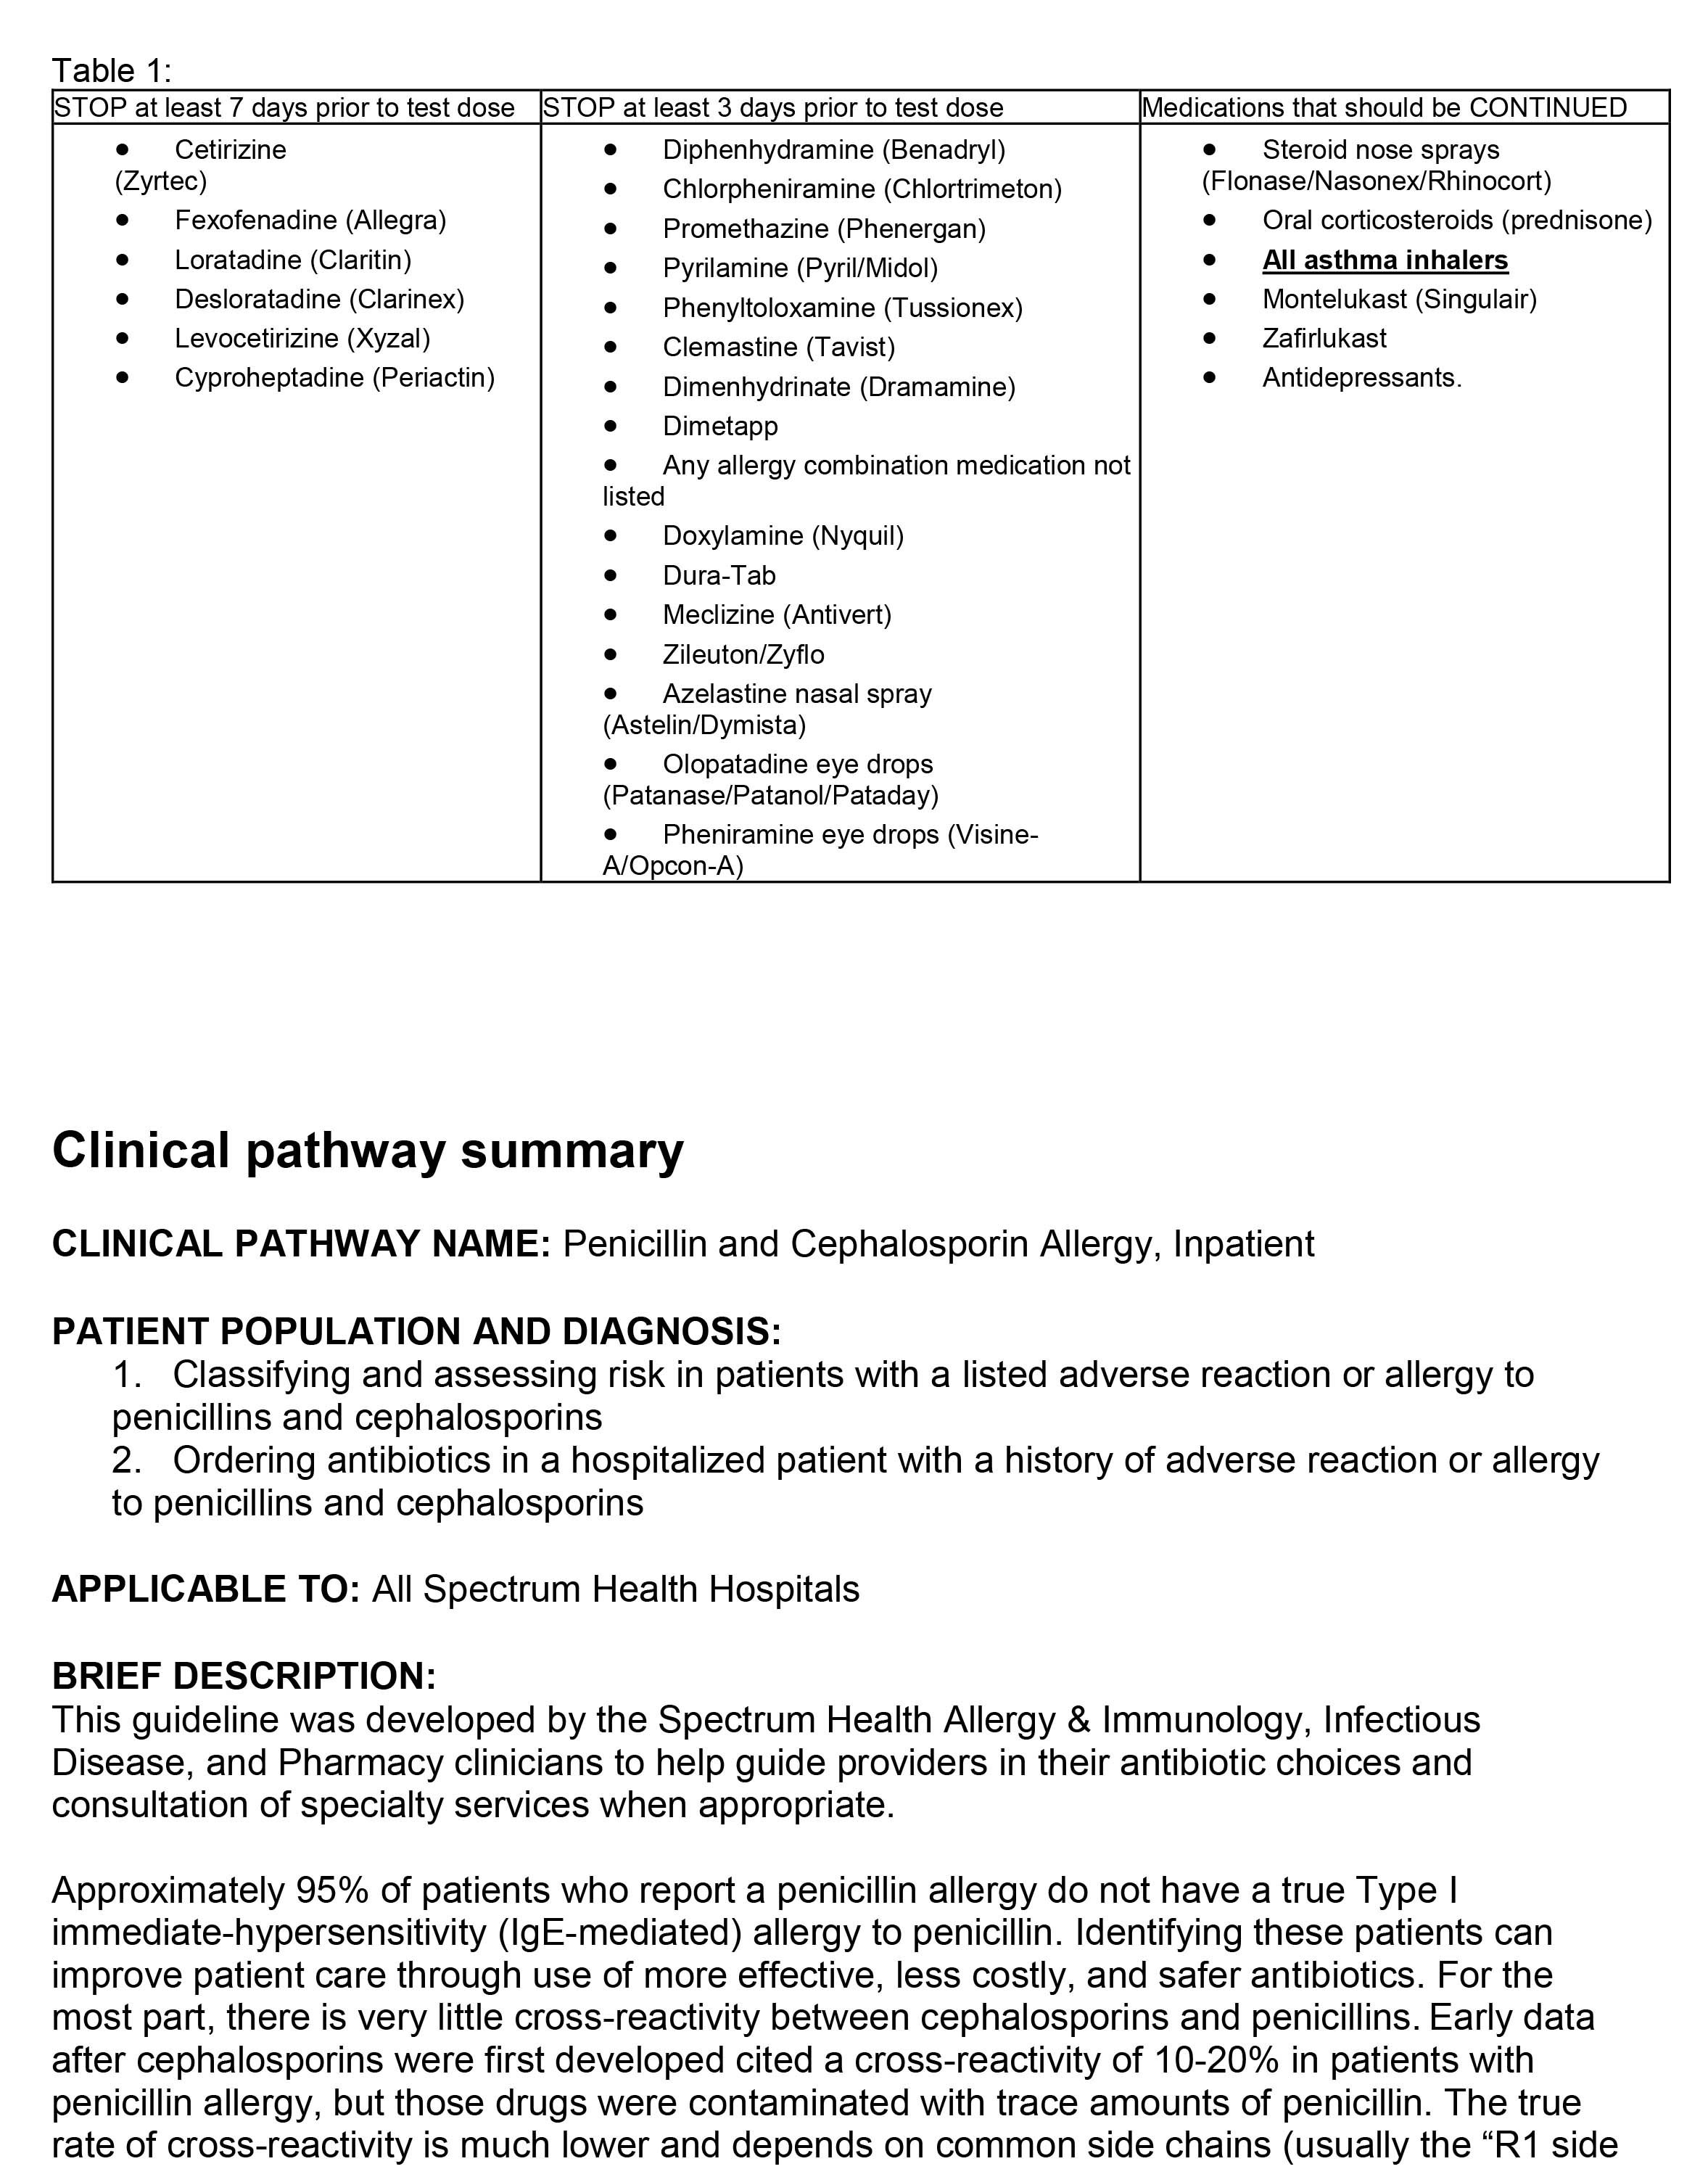 Clinical Pathways Document Image3